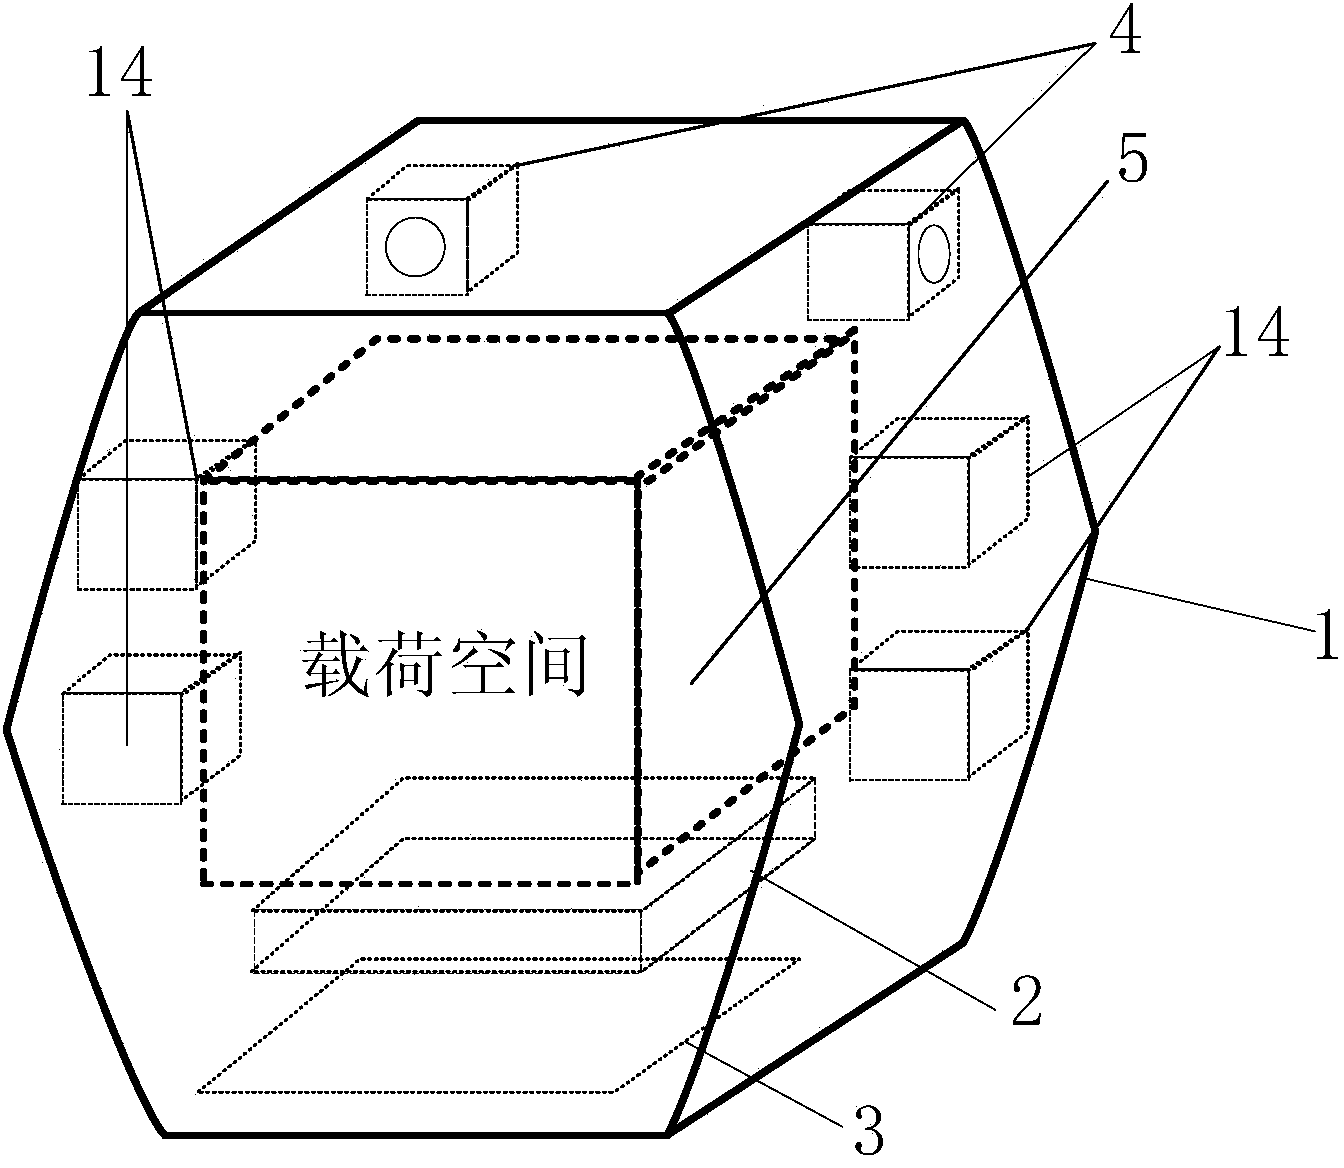 Suspension device and microgravity experimental method applied to interior of space capsule